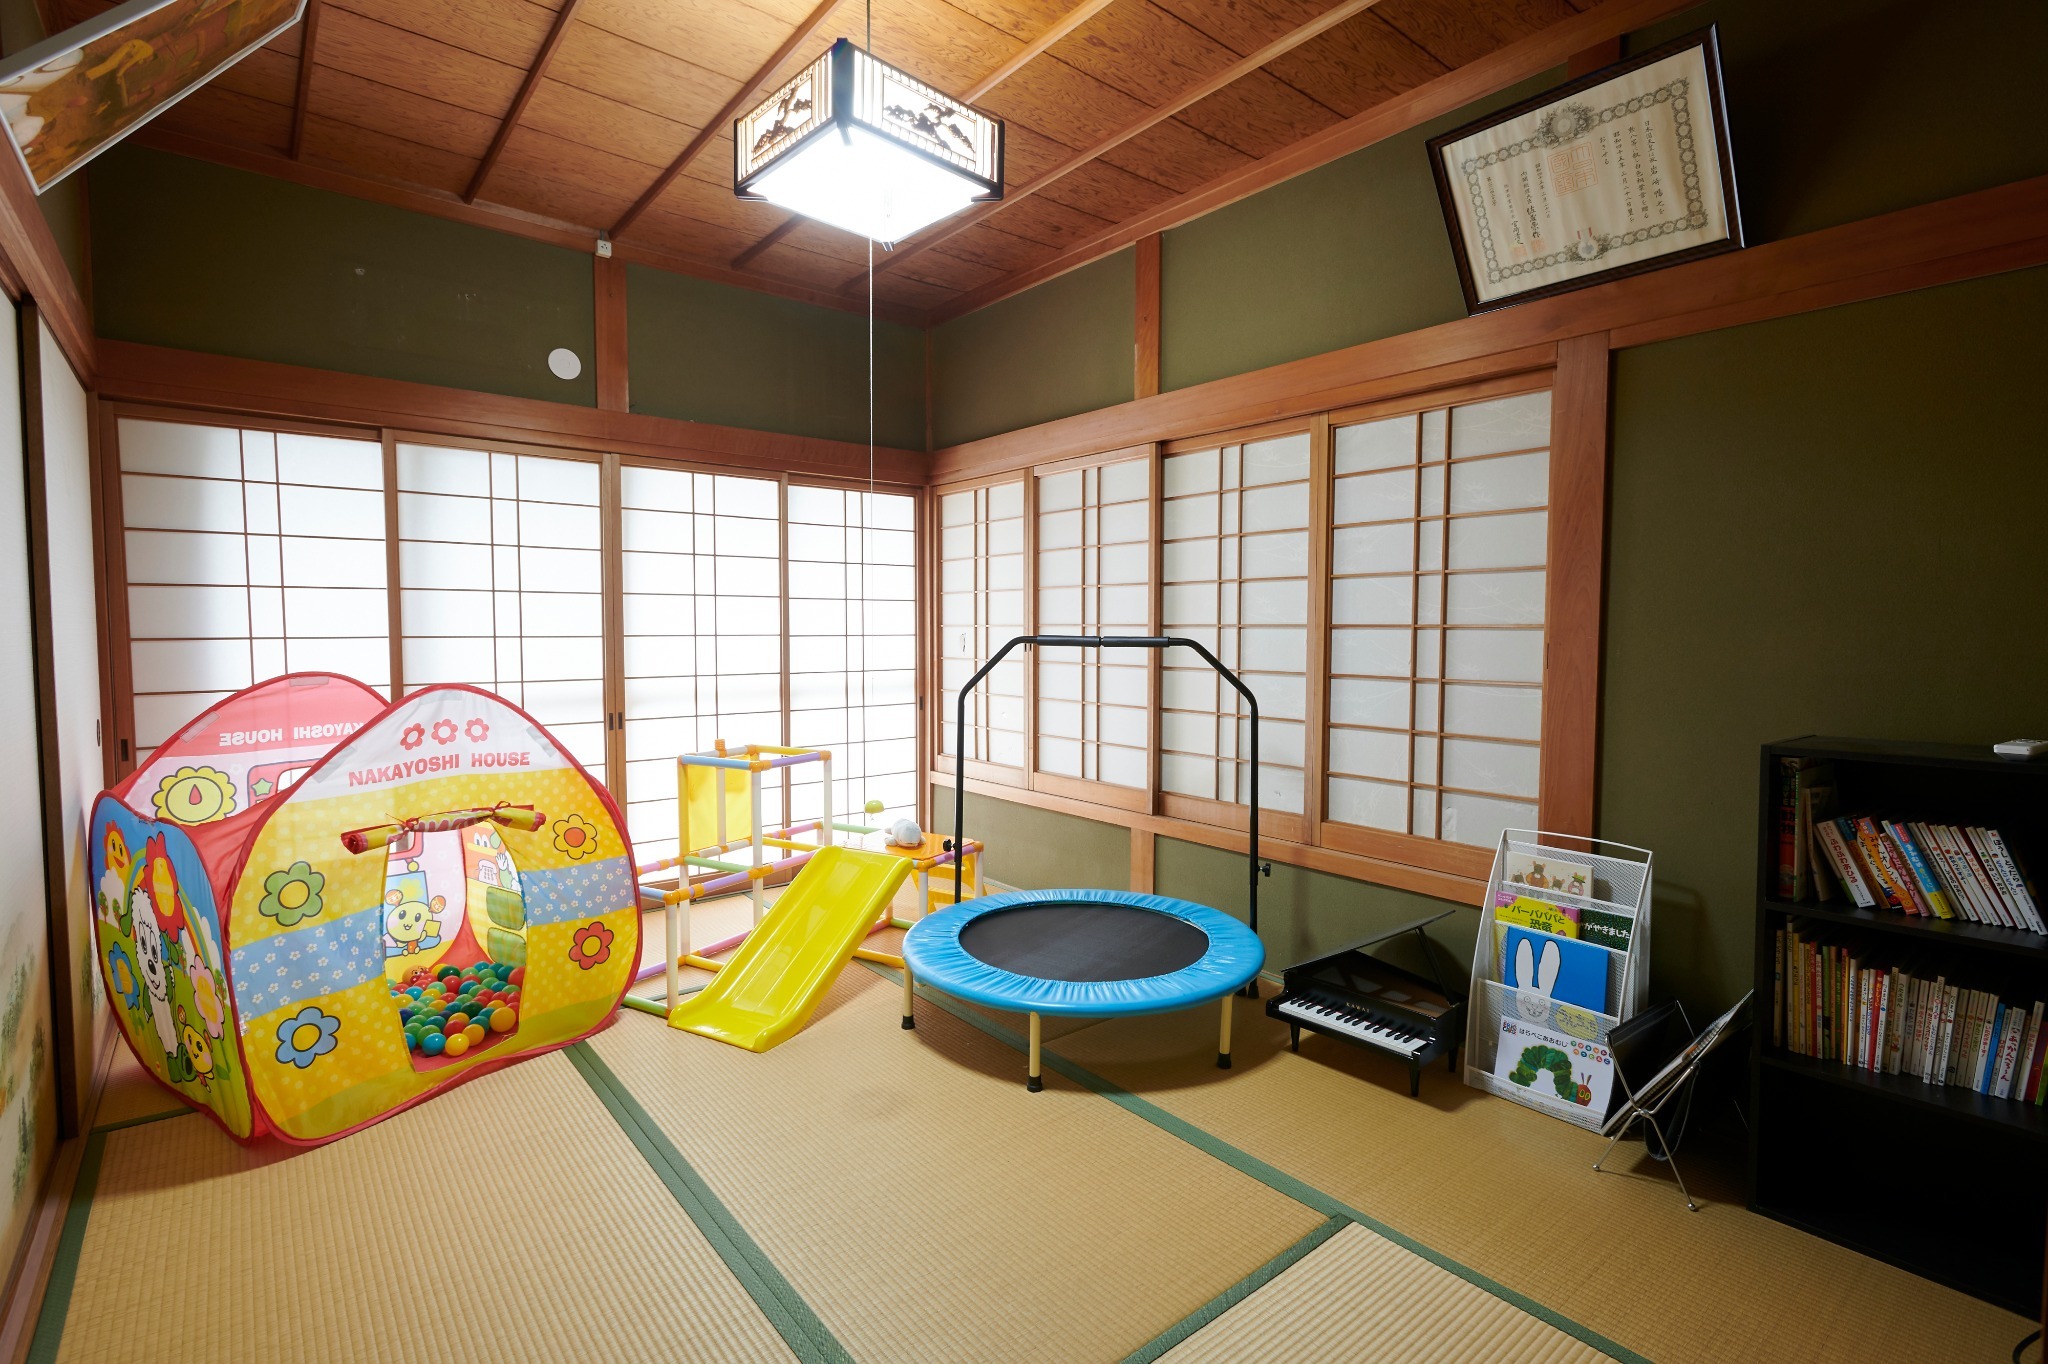 A playroom for children is available in house. Recommended for families with children. 施設内にはお子様用のプレイルームをご準備しています。お子様連れのご家族にもおすすめです。